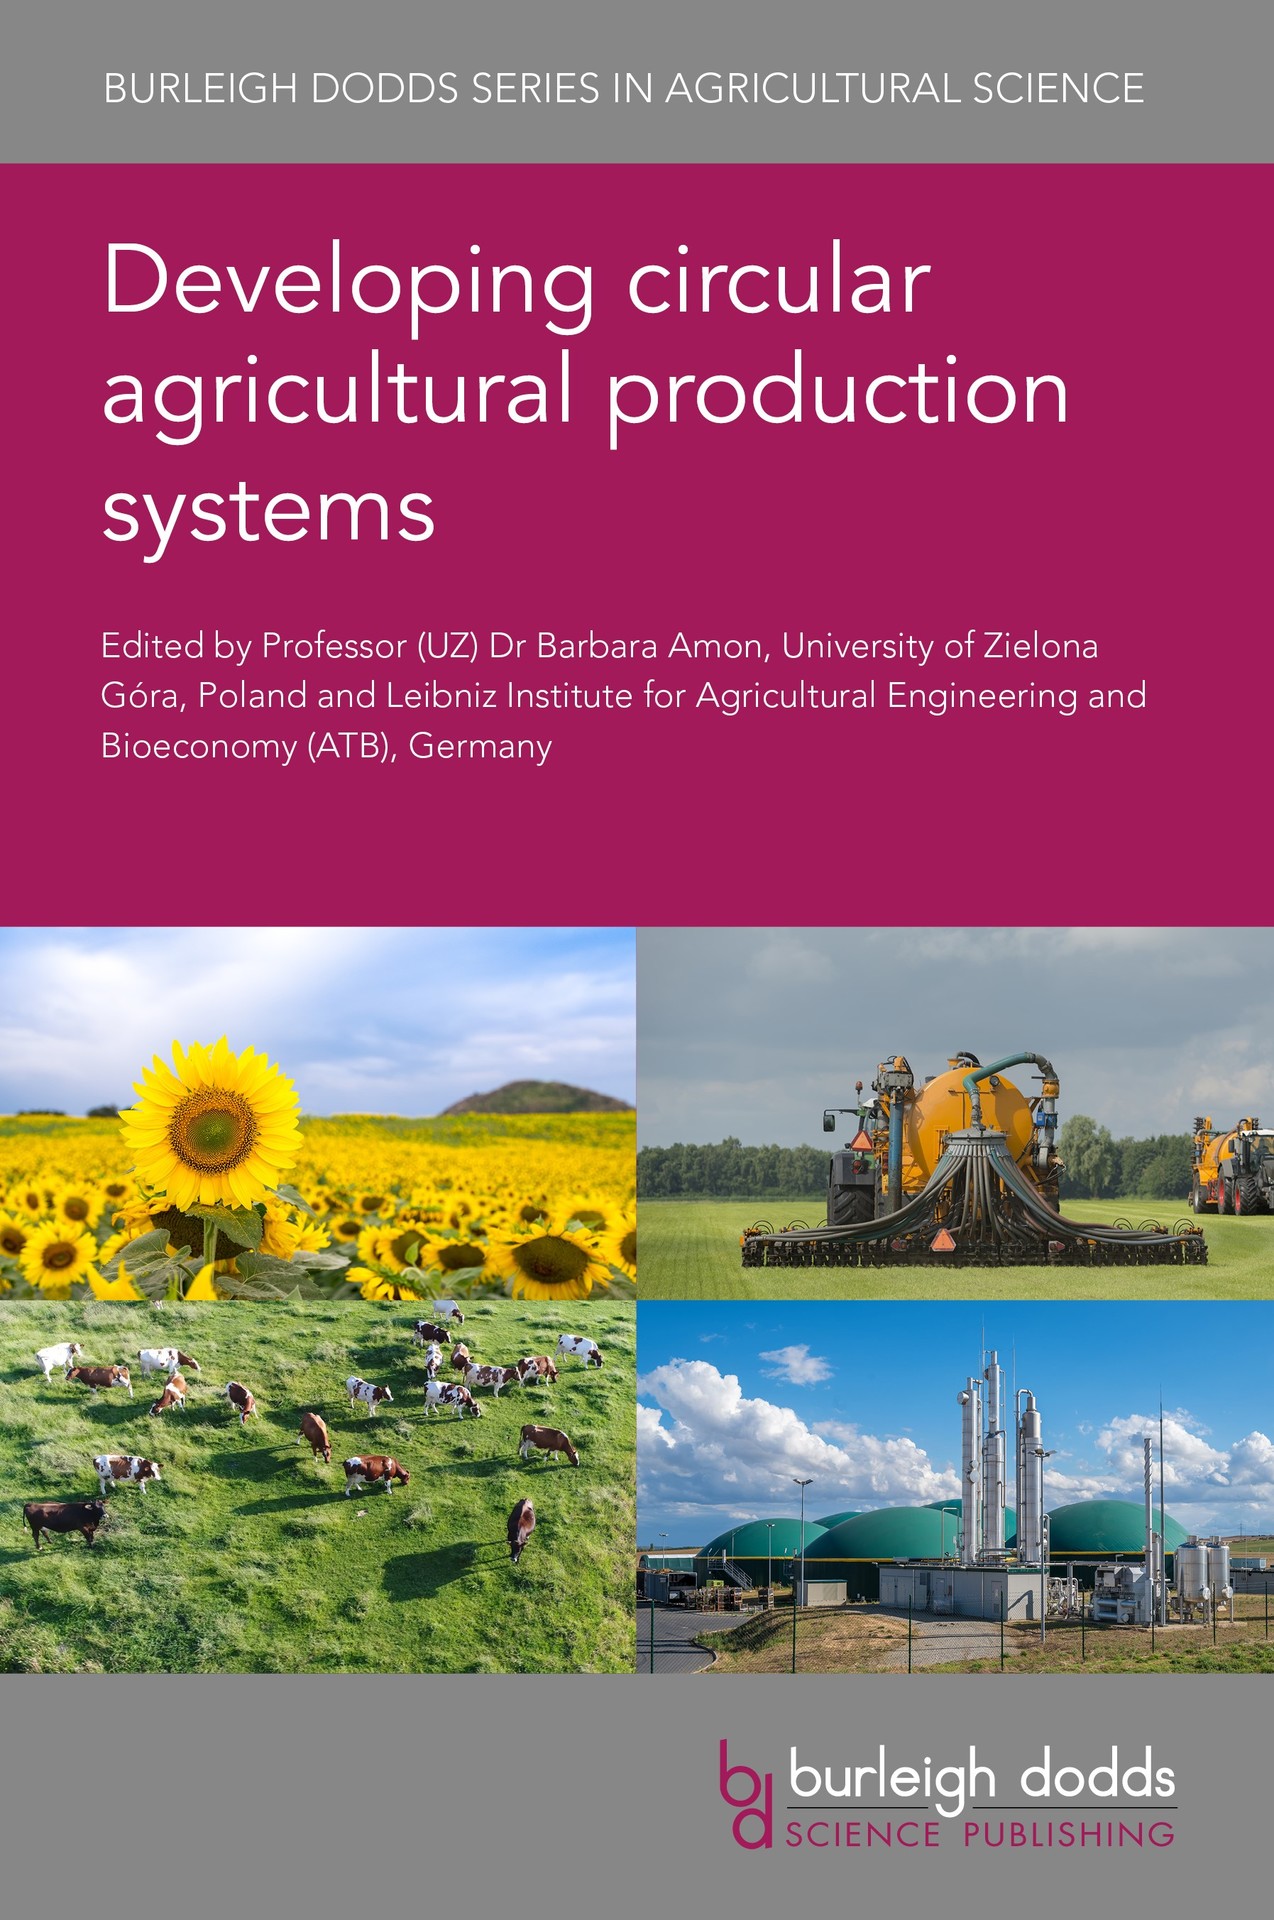 Developing circular agricultural production systems